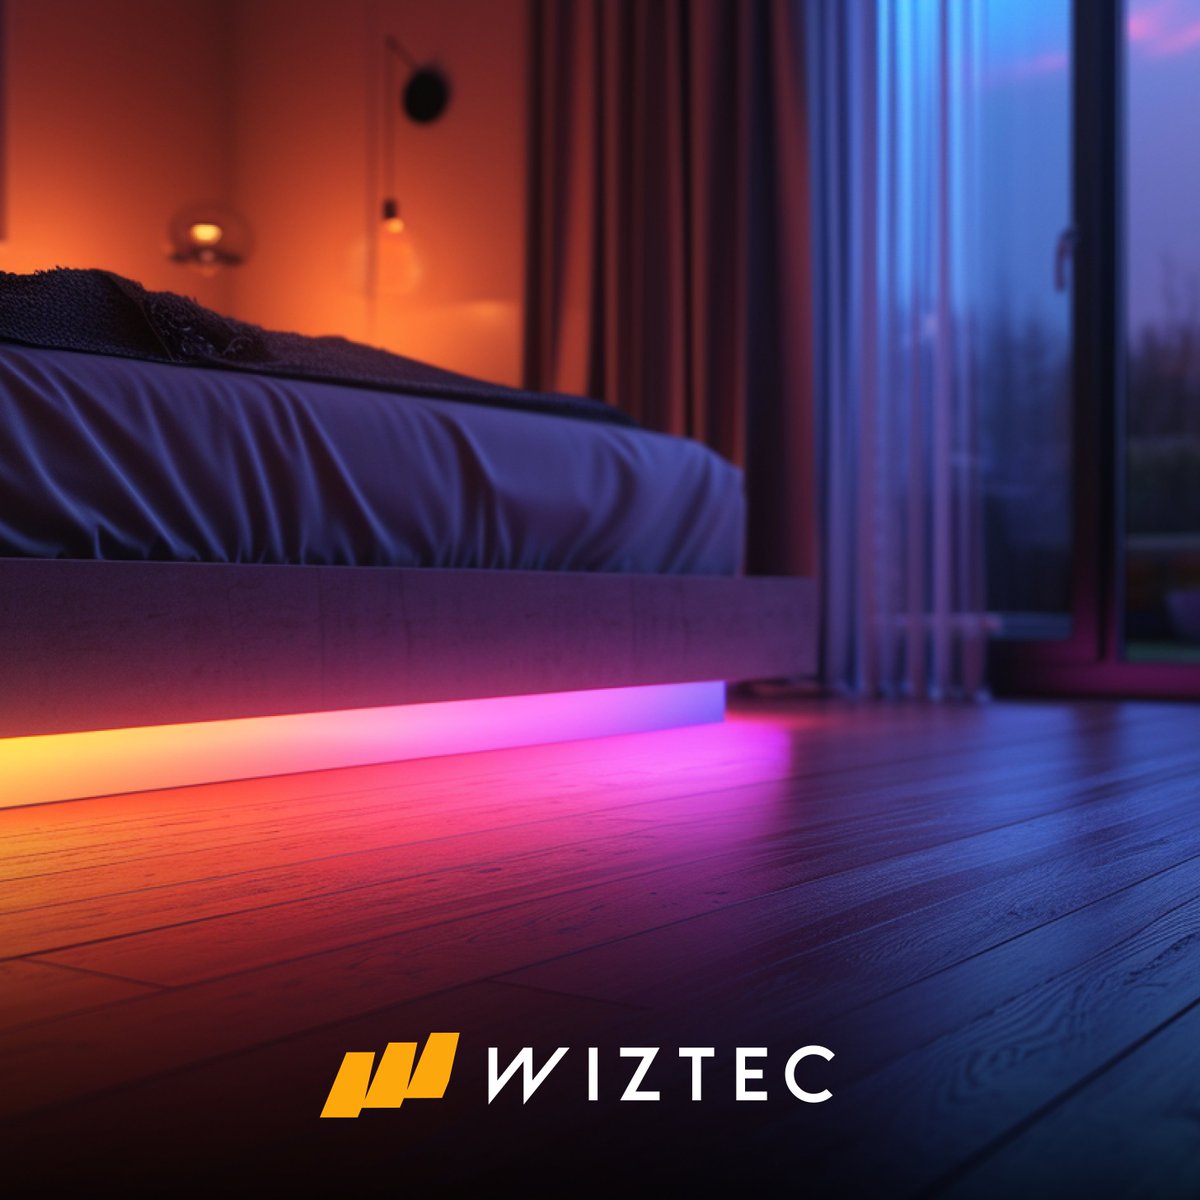 Smart Lighting from Wiztec isn't just about convenience; it's about setting the perfect mood for every moment. 💡🌈 #MoodLighting #SmartHome'#homesecurity #homeautomation #cableinstallation #hometheaterinstallation #HomeSoundSystem #smarthome #smartbusiness #homeprojects